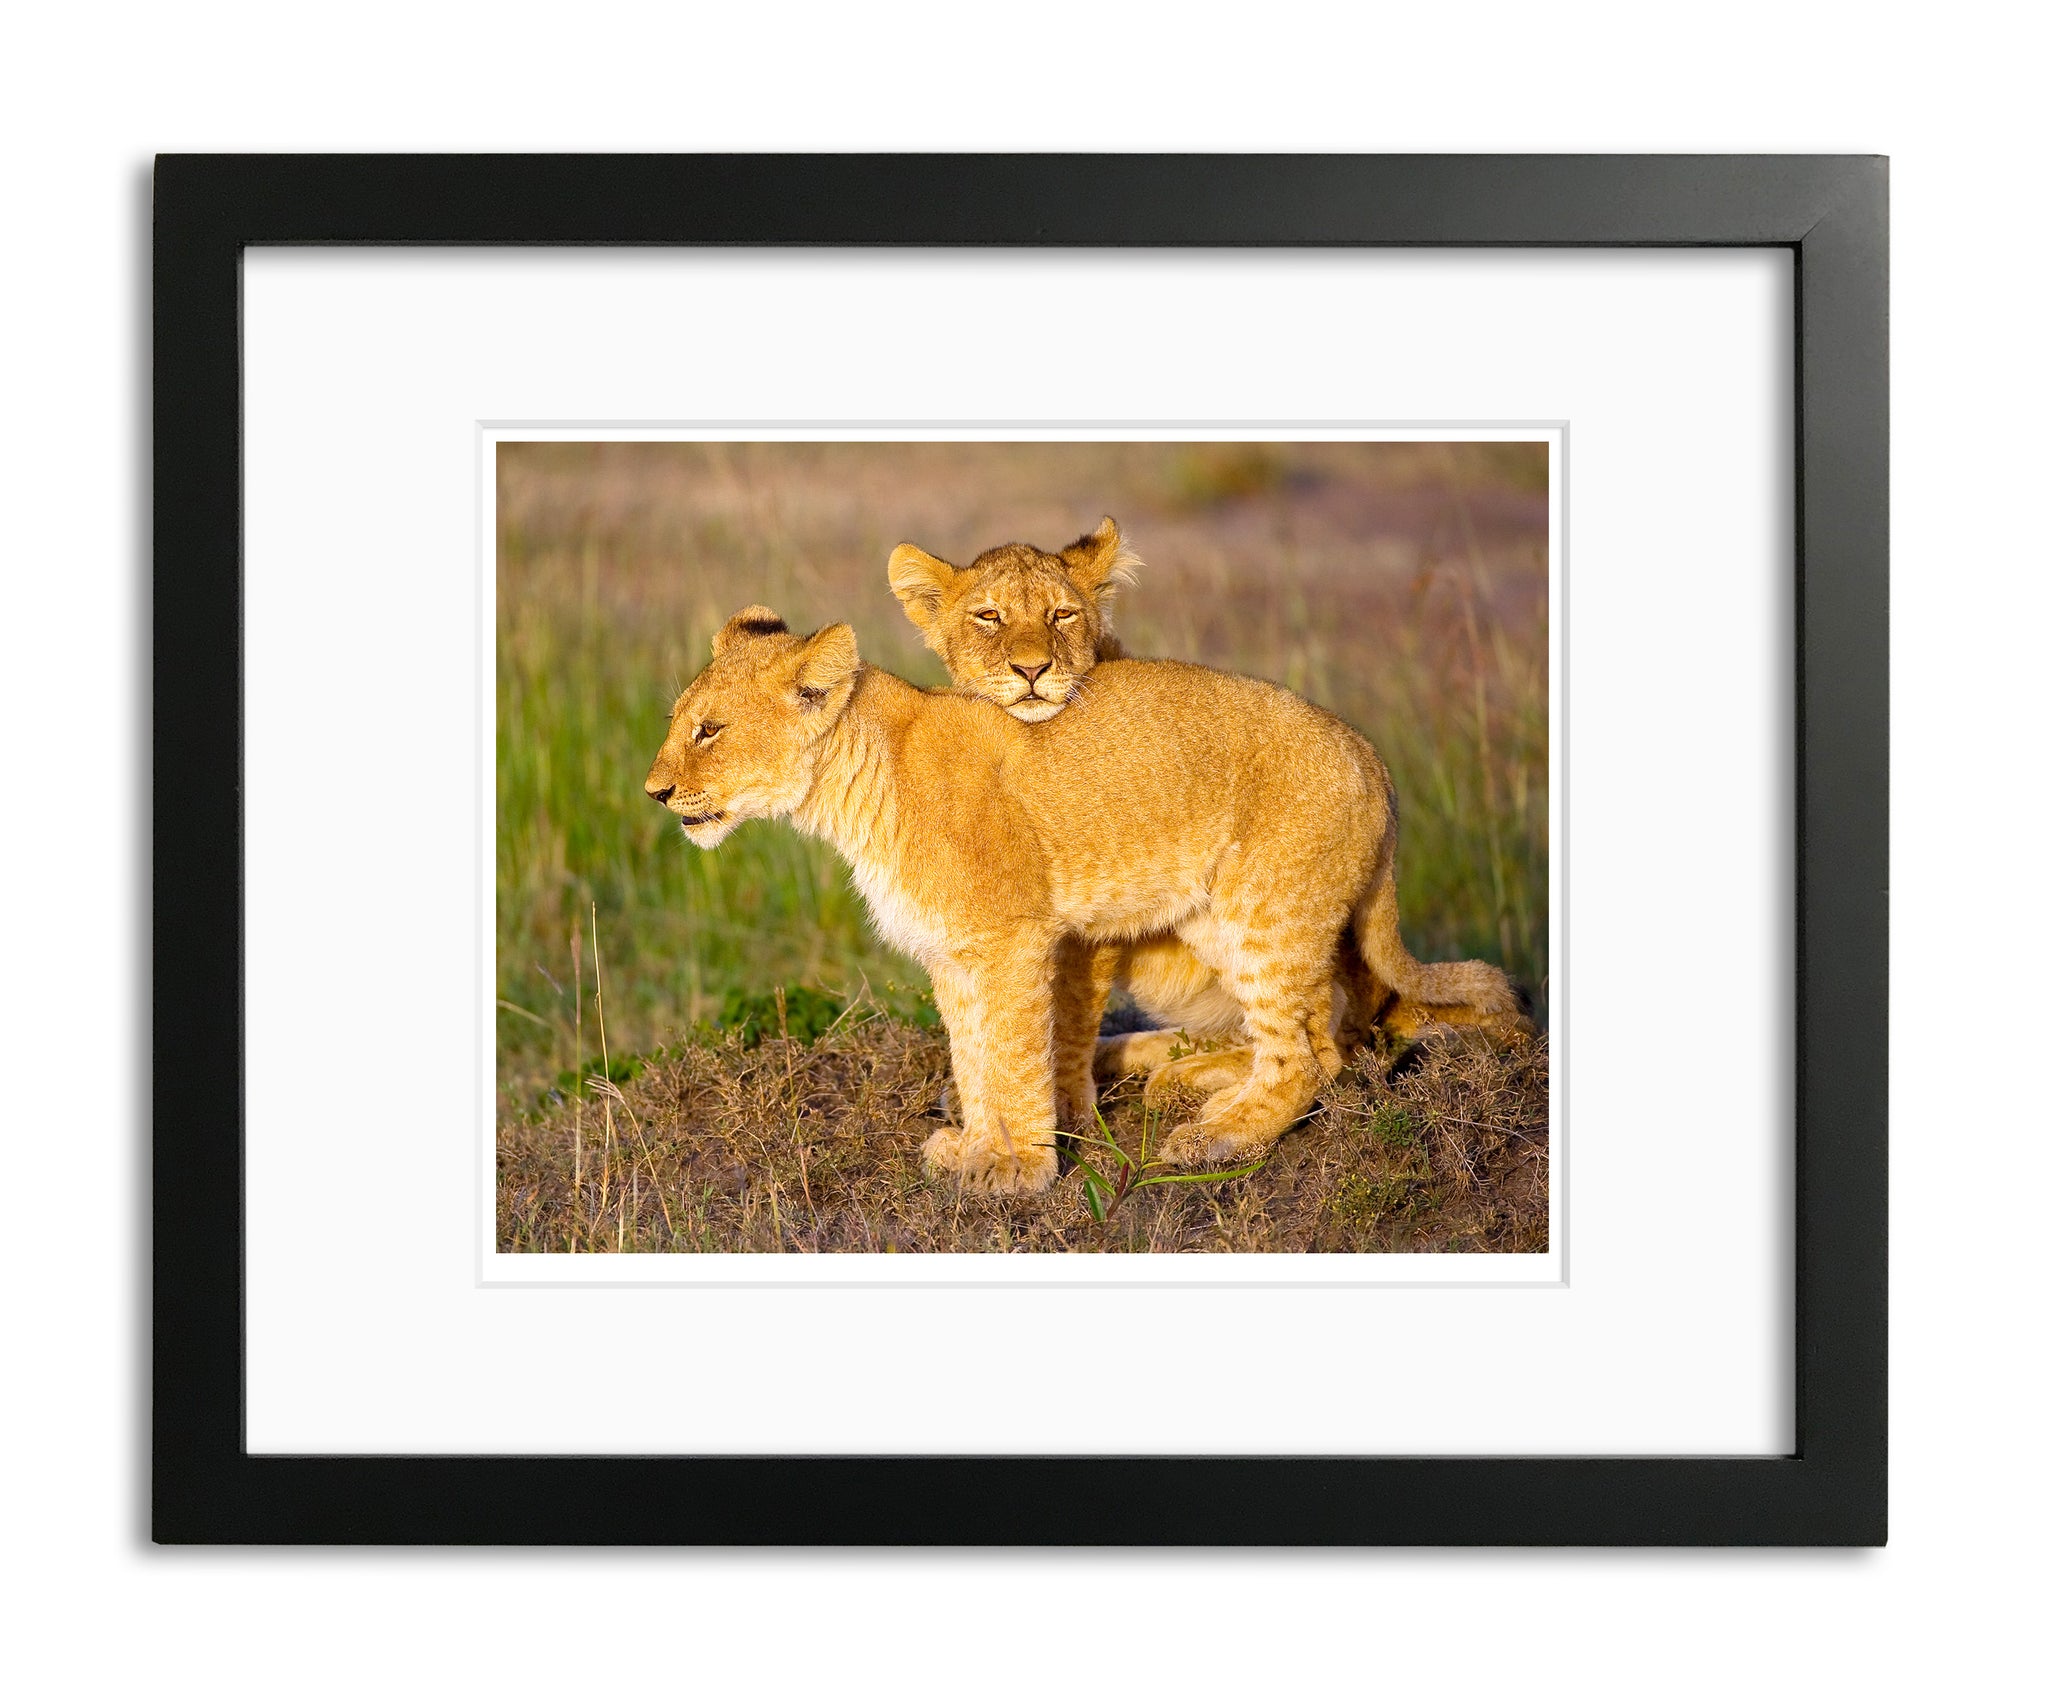 He's Not Heavy He's My Brother, Lion cubs, Tanzania, by Robert Ross